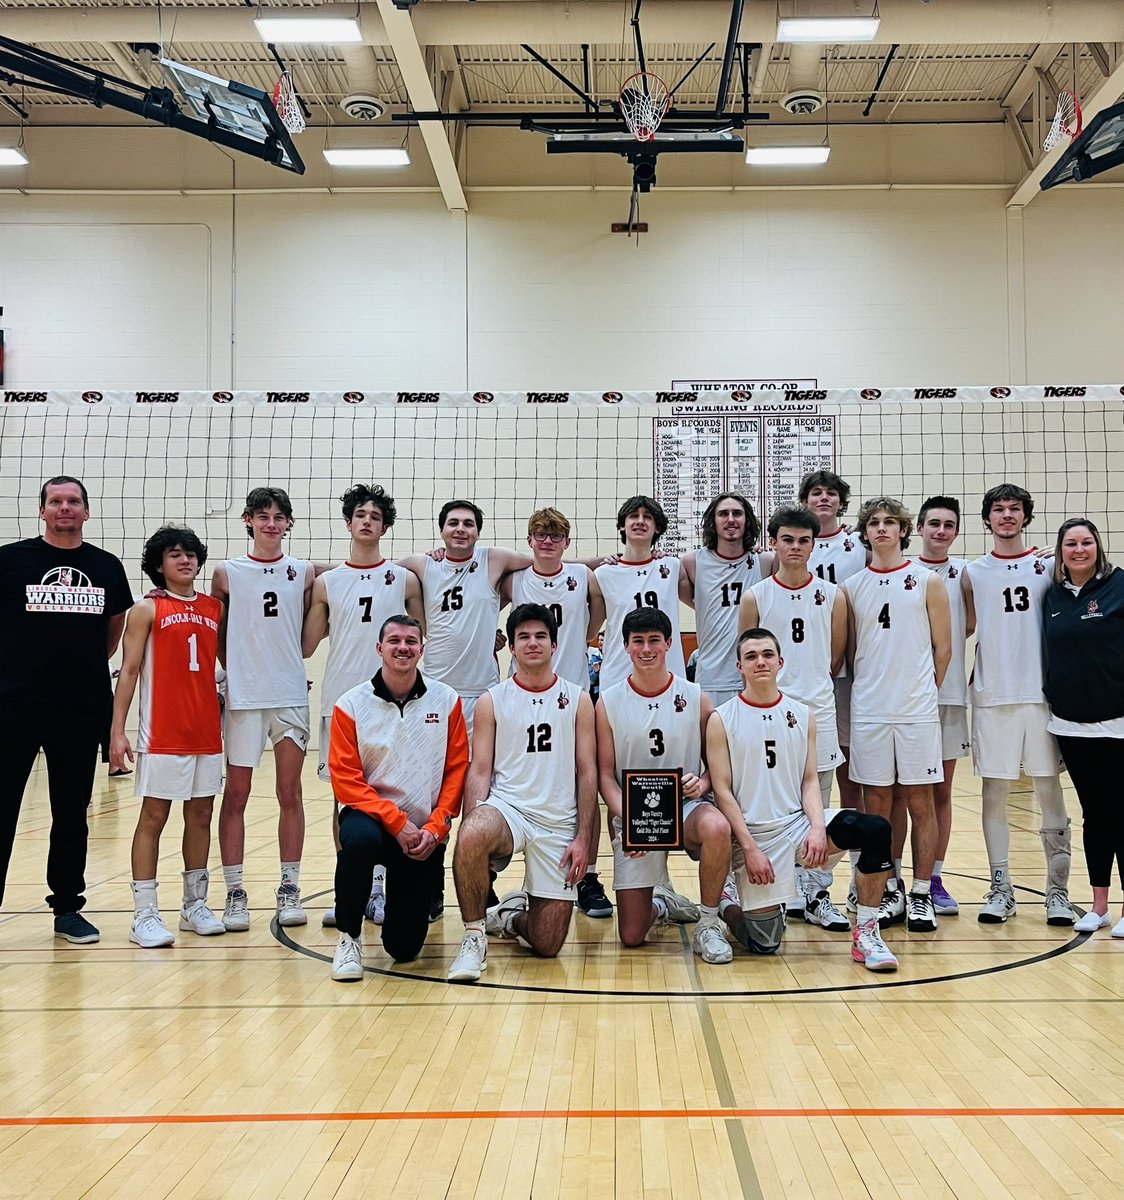 A good day for Boys Volleyball - The Varsity Warriors continue to put on an impressive show. 14-3 on the season & taking home some hardware! 2nd place finish at the Wheaton Warrenville South Invite 🧡🏐💪